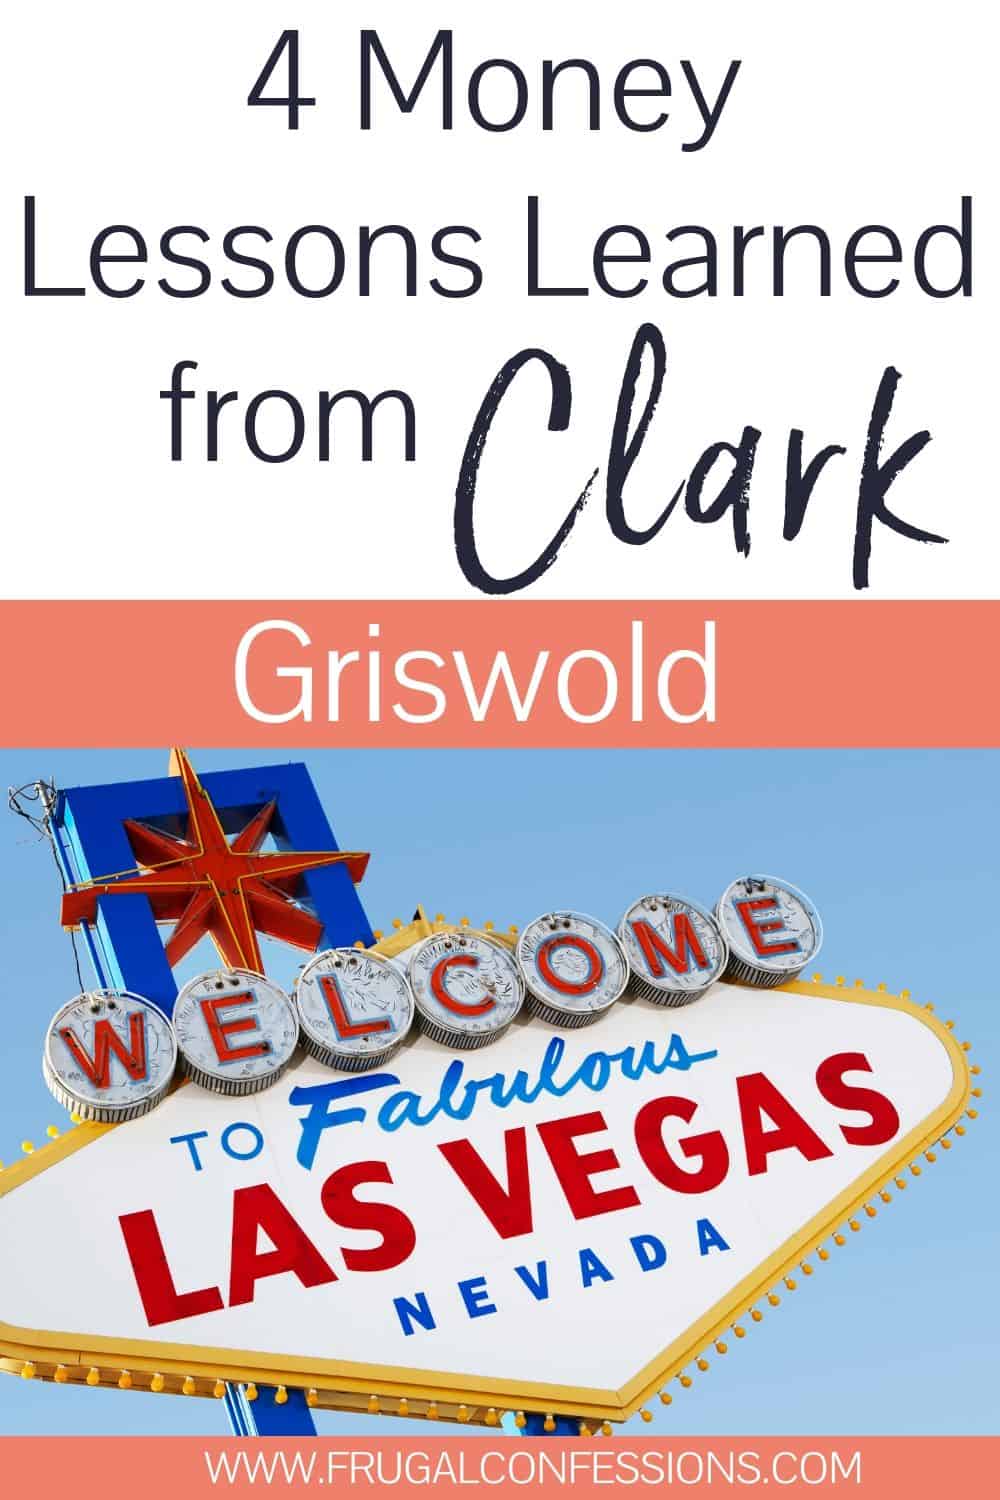 las vegas welcome sign, text overlay 